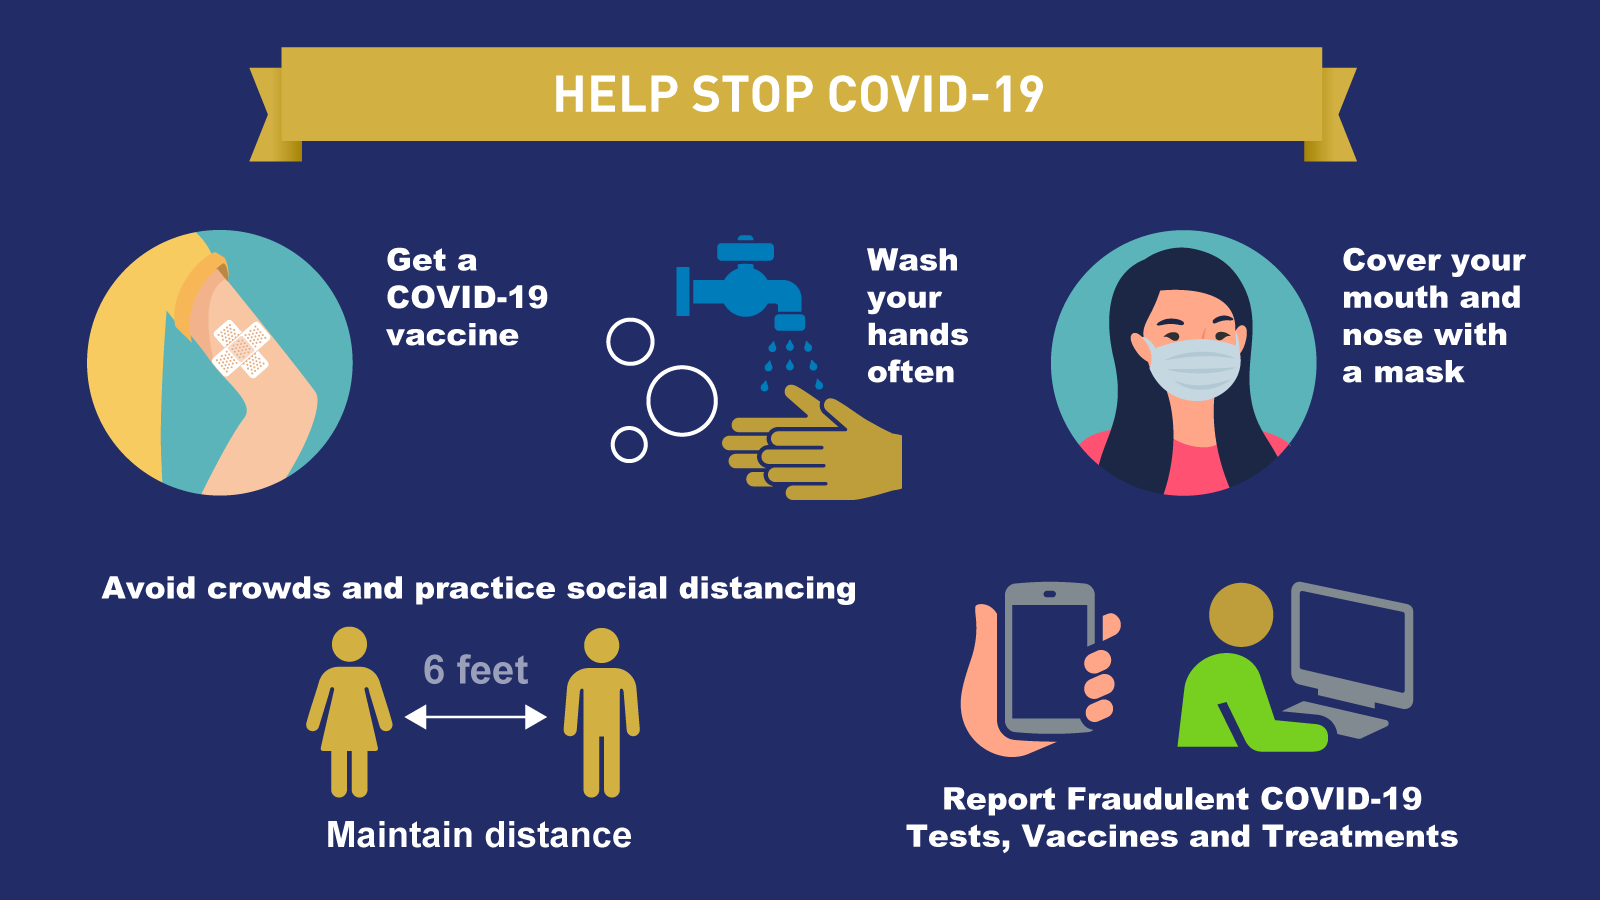 Wearing Mask And Social Distancing: Ways To Protect Your Families And Relatives During COVID 19